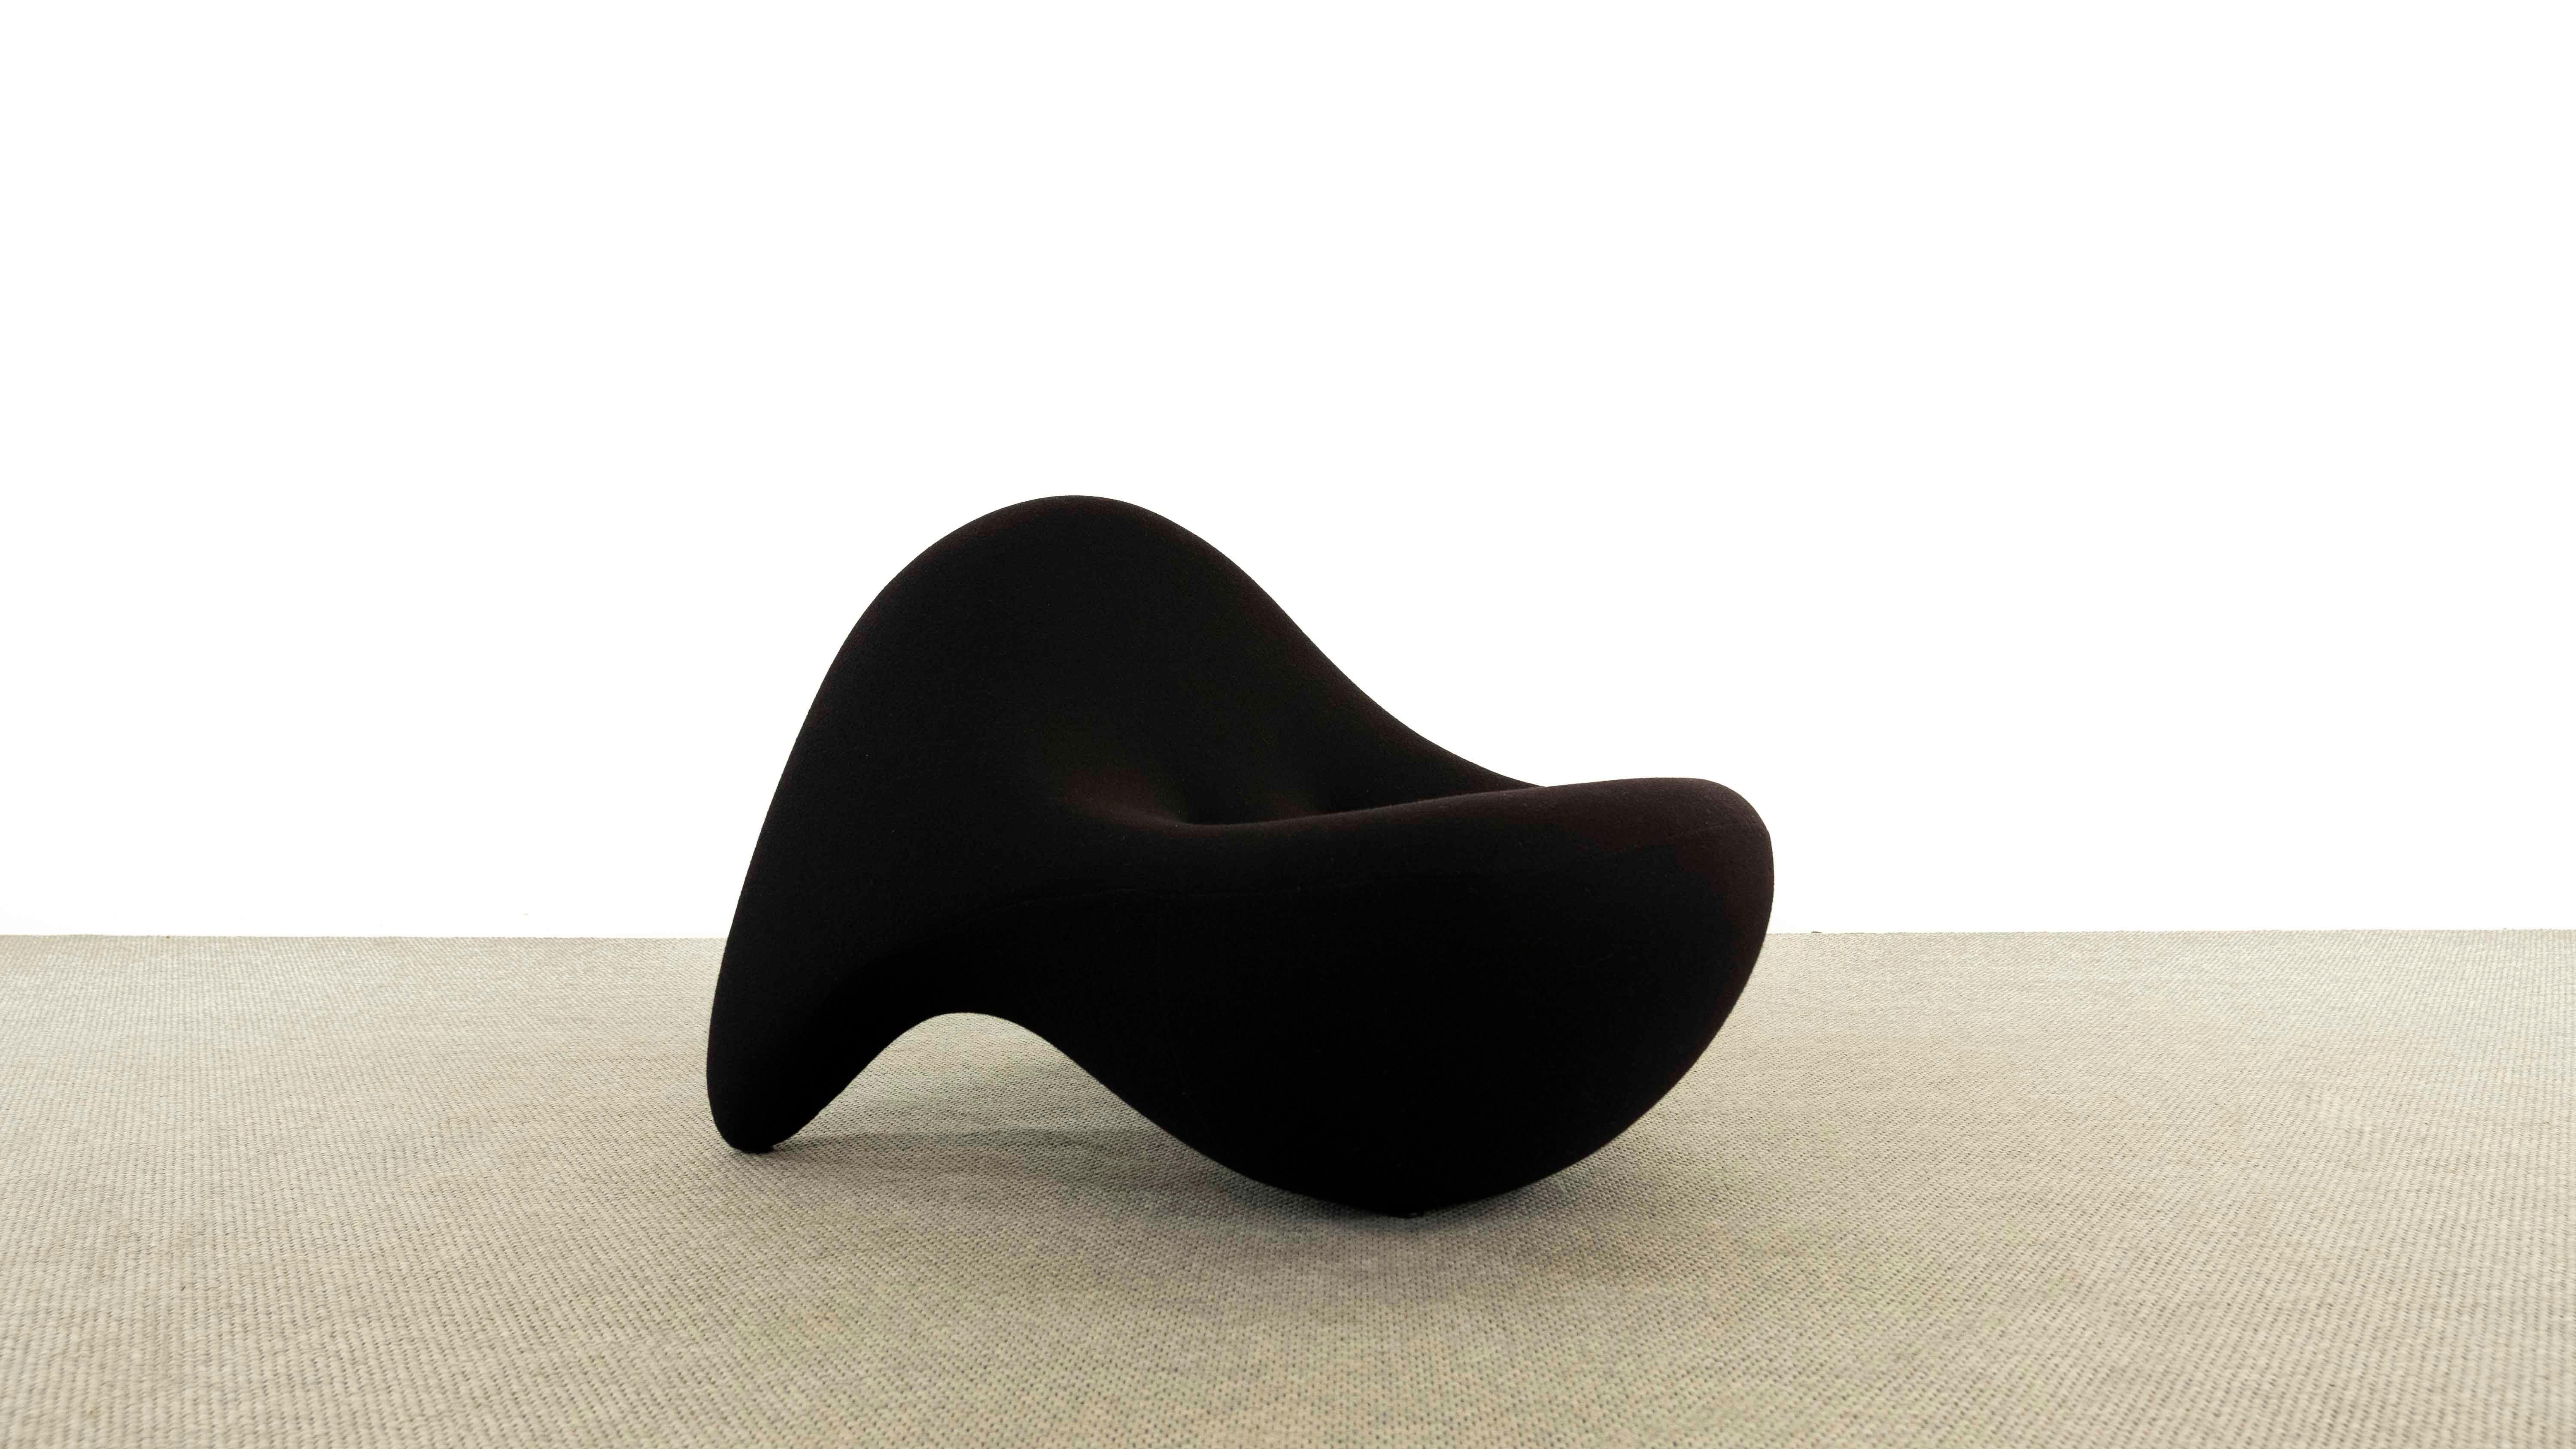 Lounge Chair / Armchair by Luigi Colani from the Meerescollection. Designed 1968. Manufactured by Kusch& Co. Model 9900/3. Recent Edition. Was exhibition piece in showroom. Upholstery in black fabrics with typical 4 buttons.